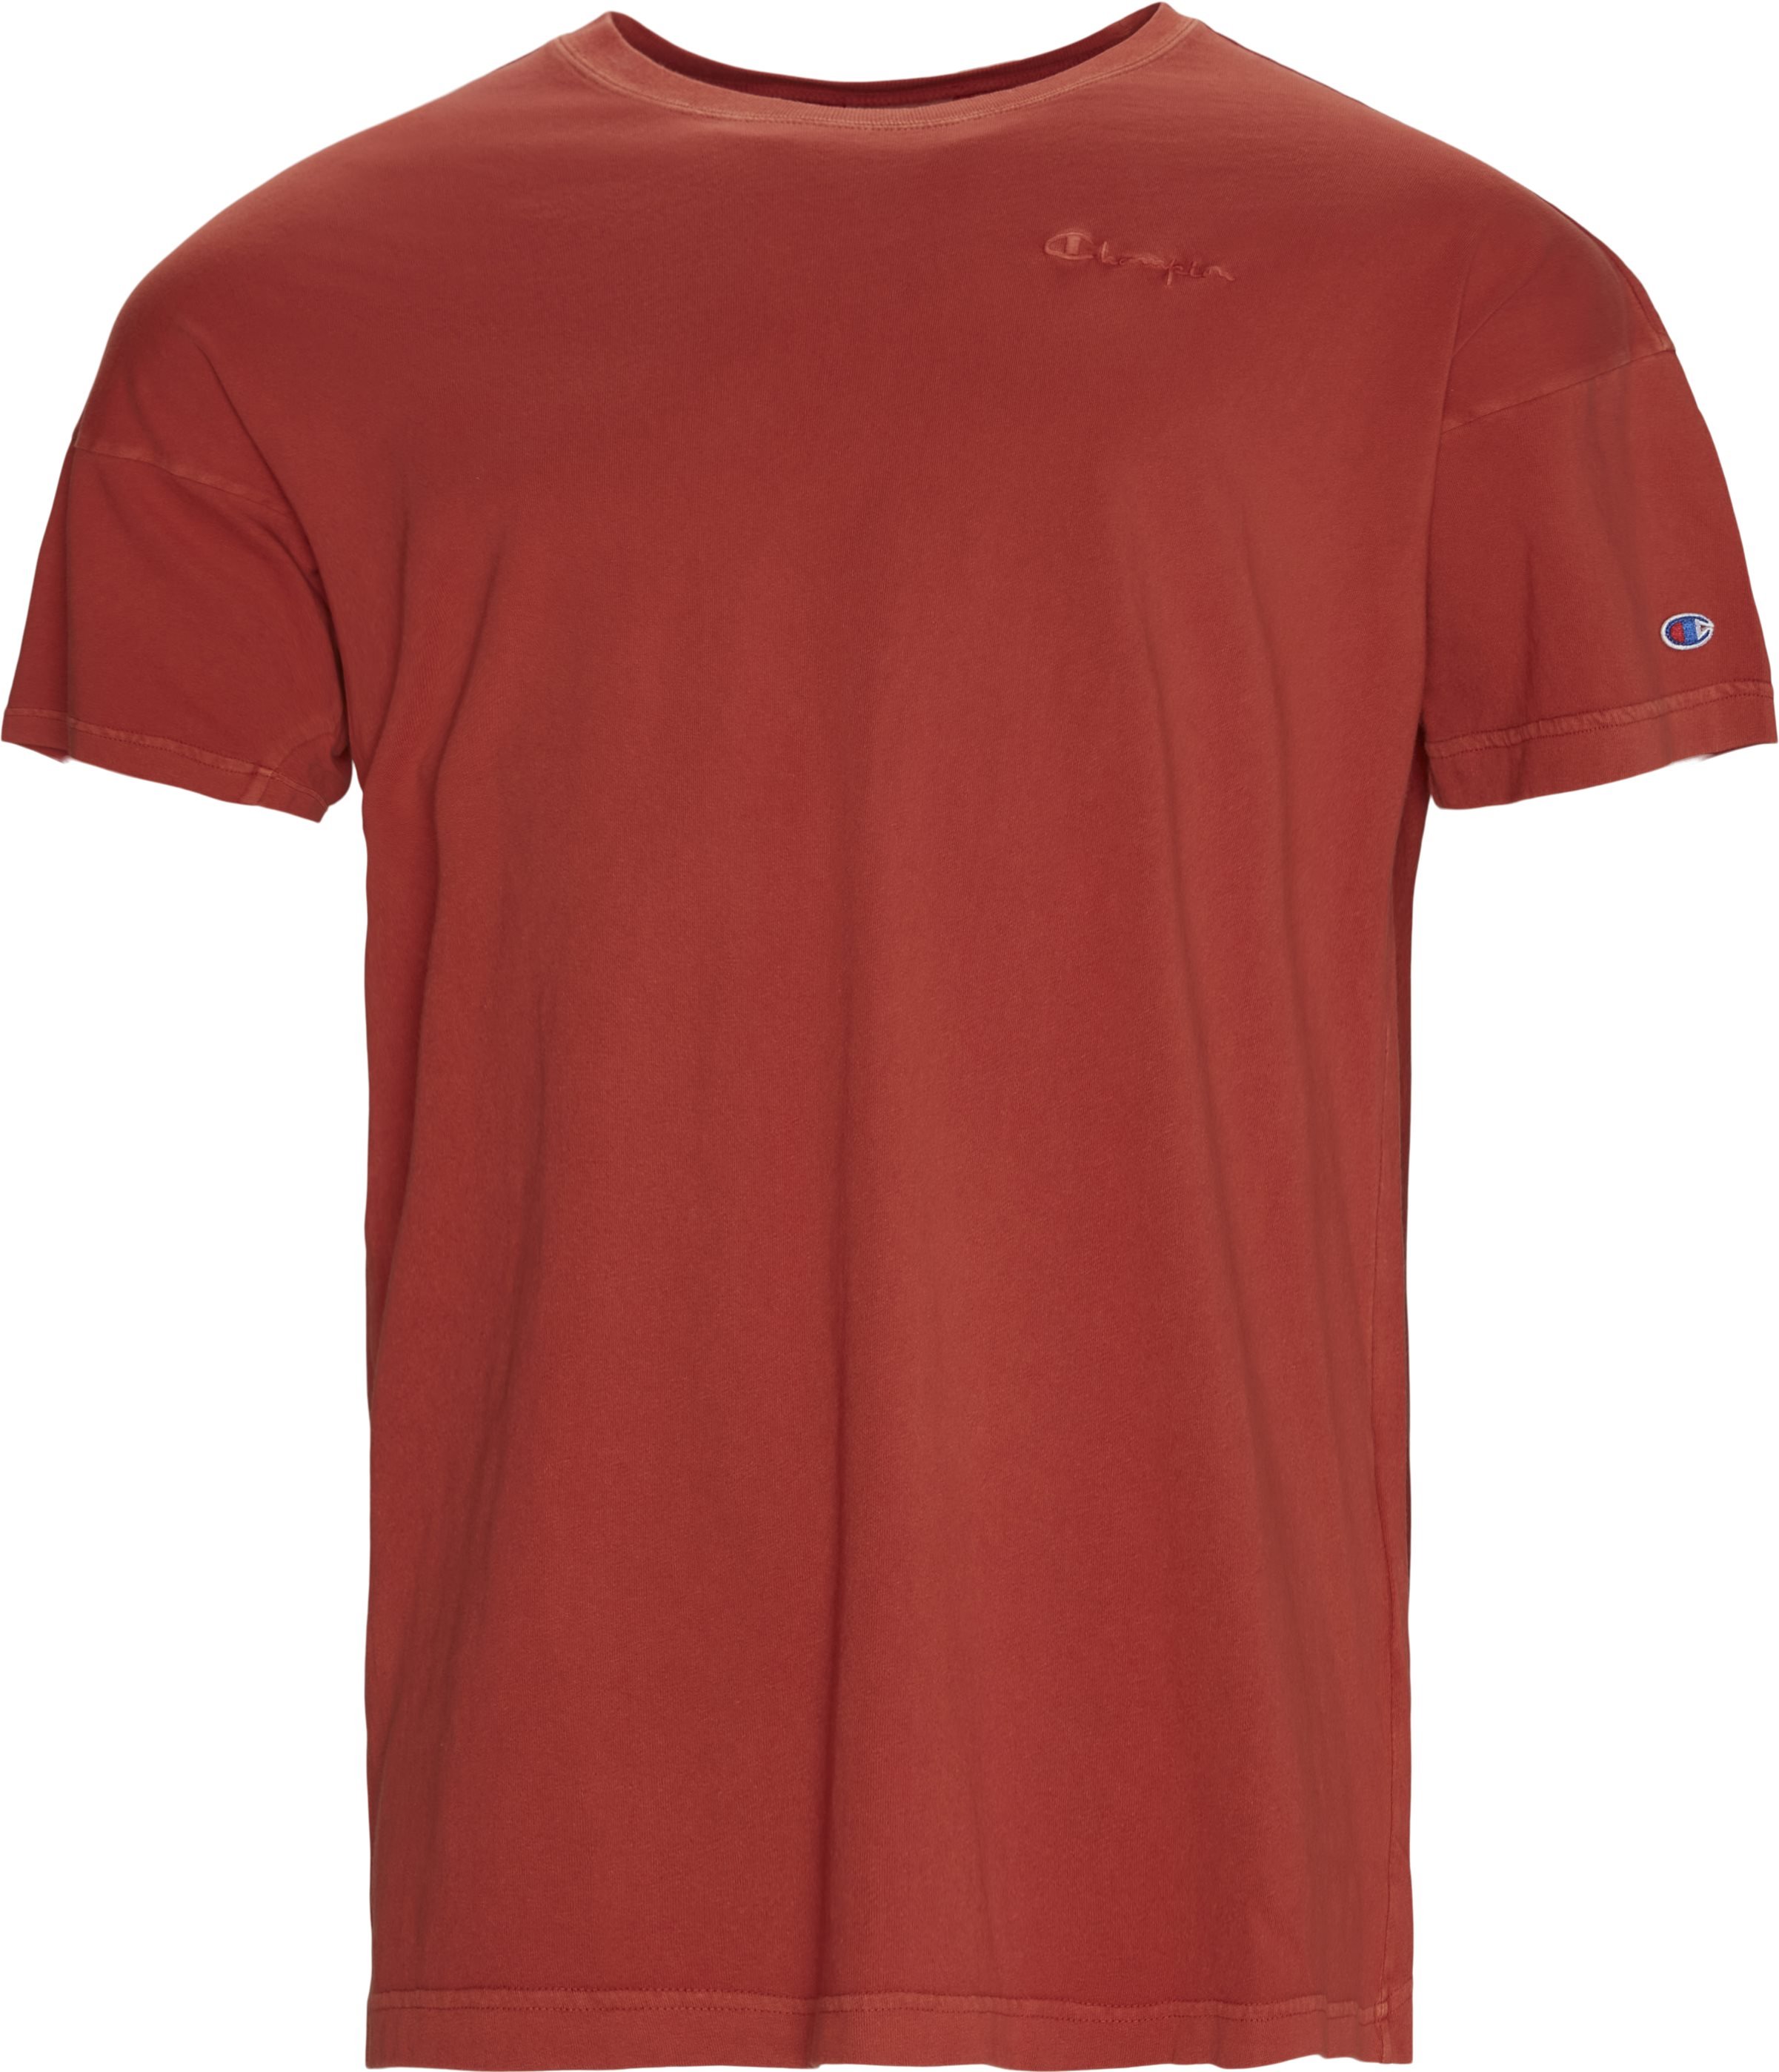 GD Tee - T-shirts - Regular fit - Red